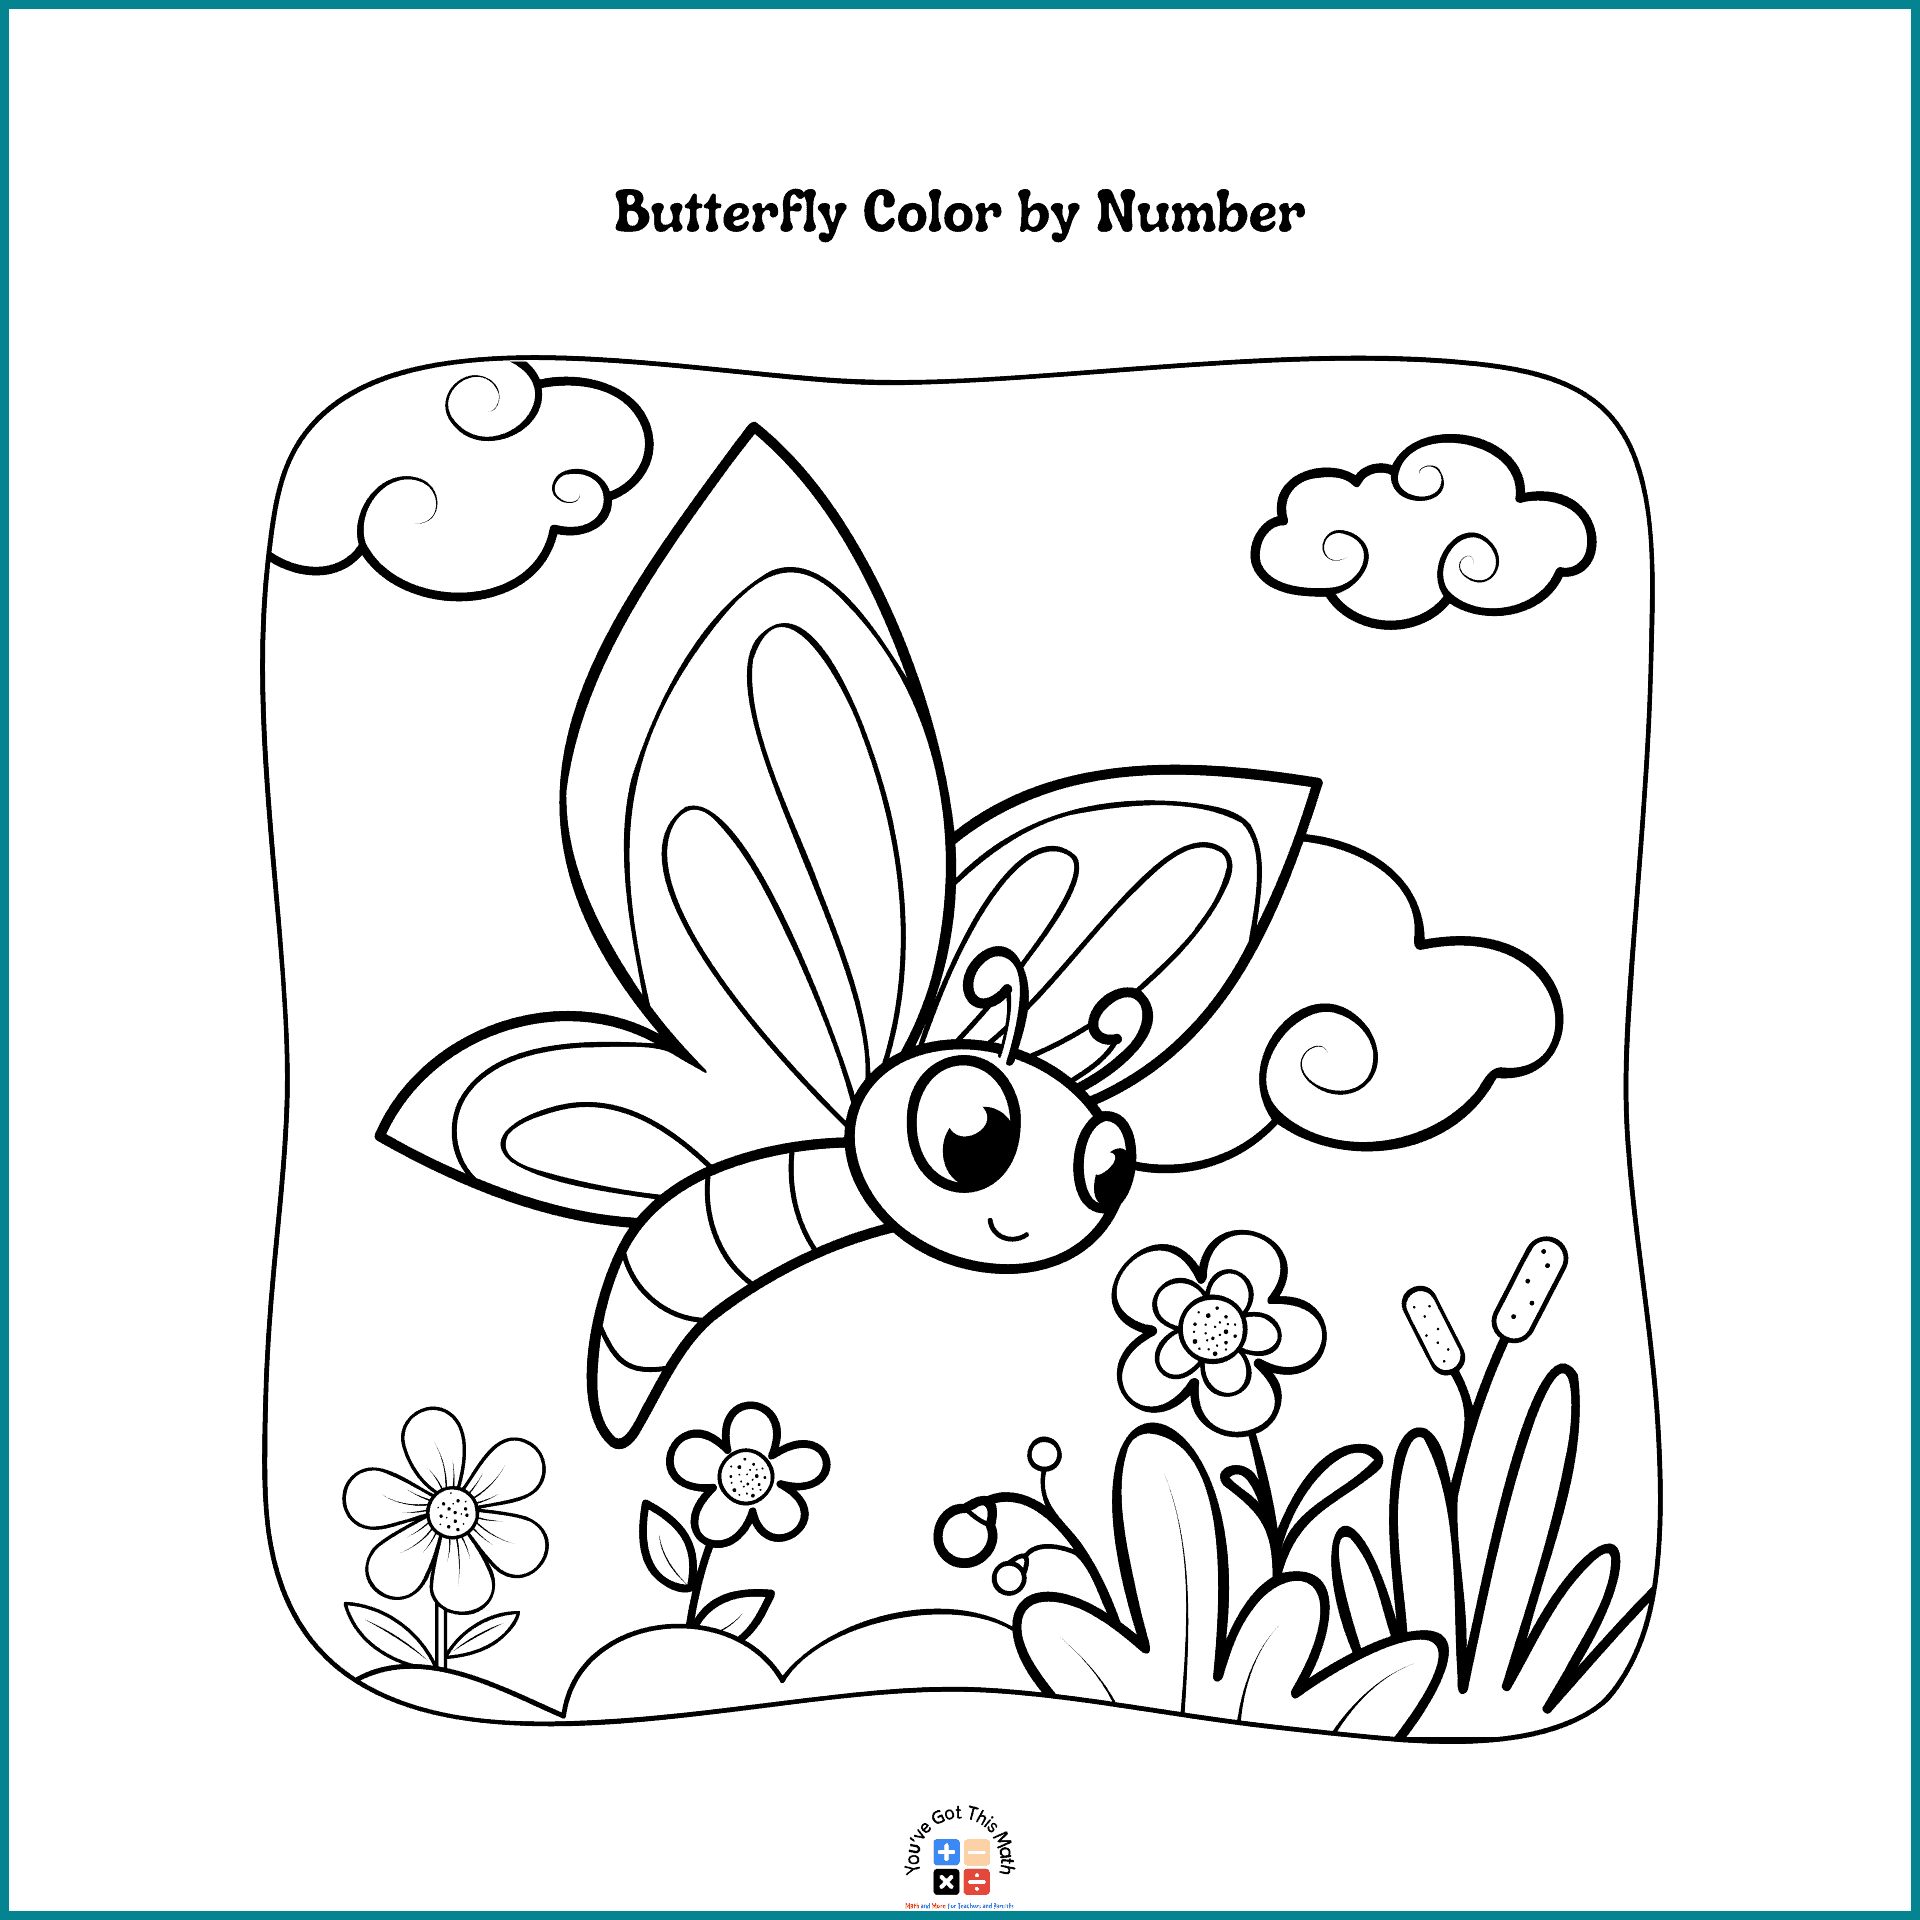 20 Fun Butterfly Coloring Pages | Free Printables